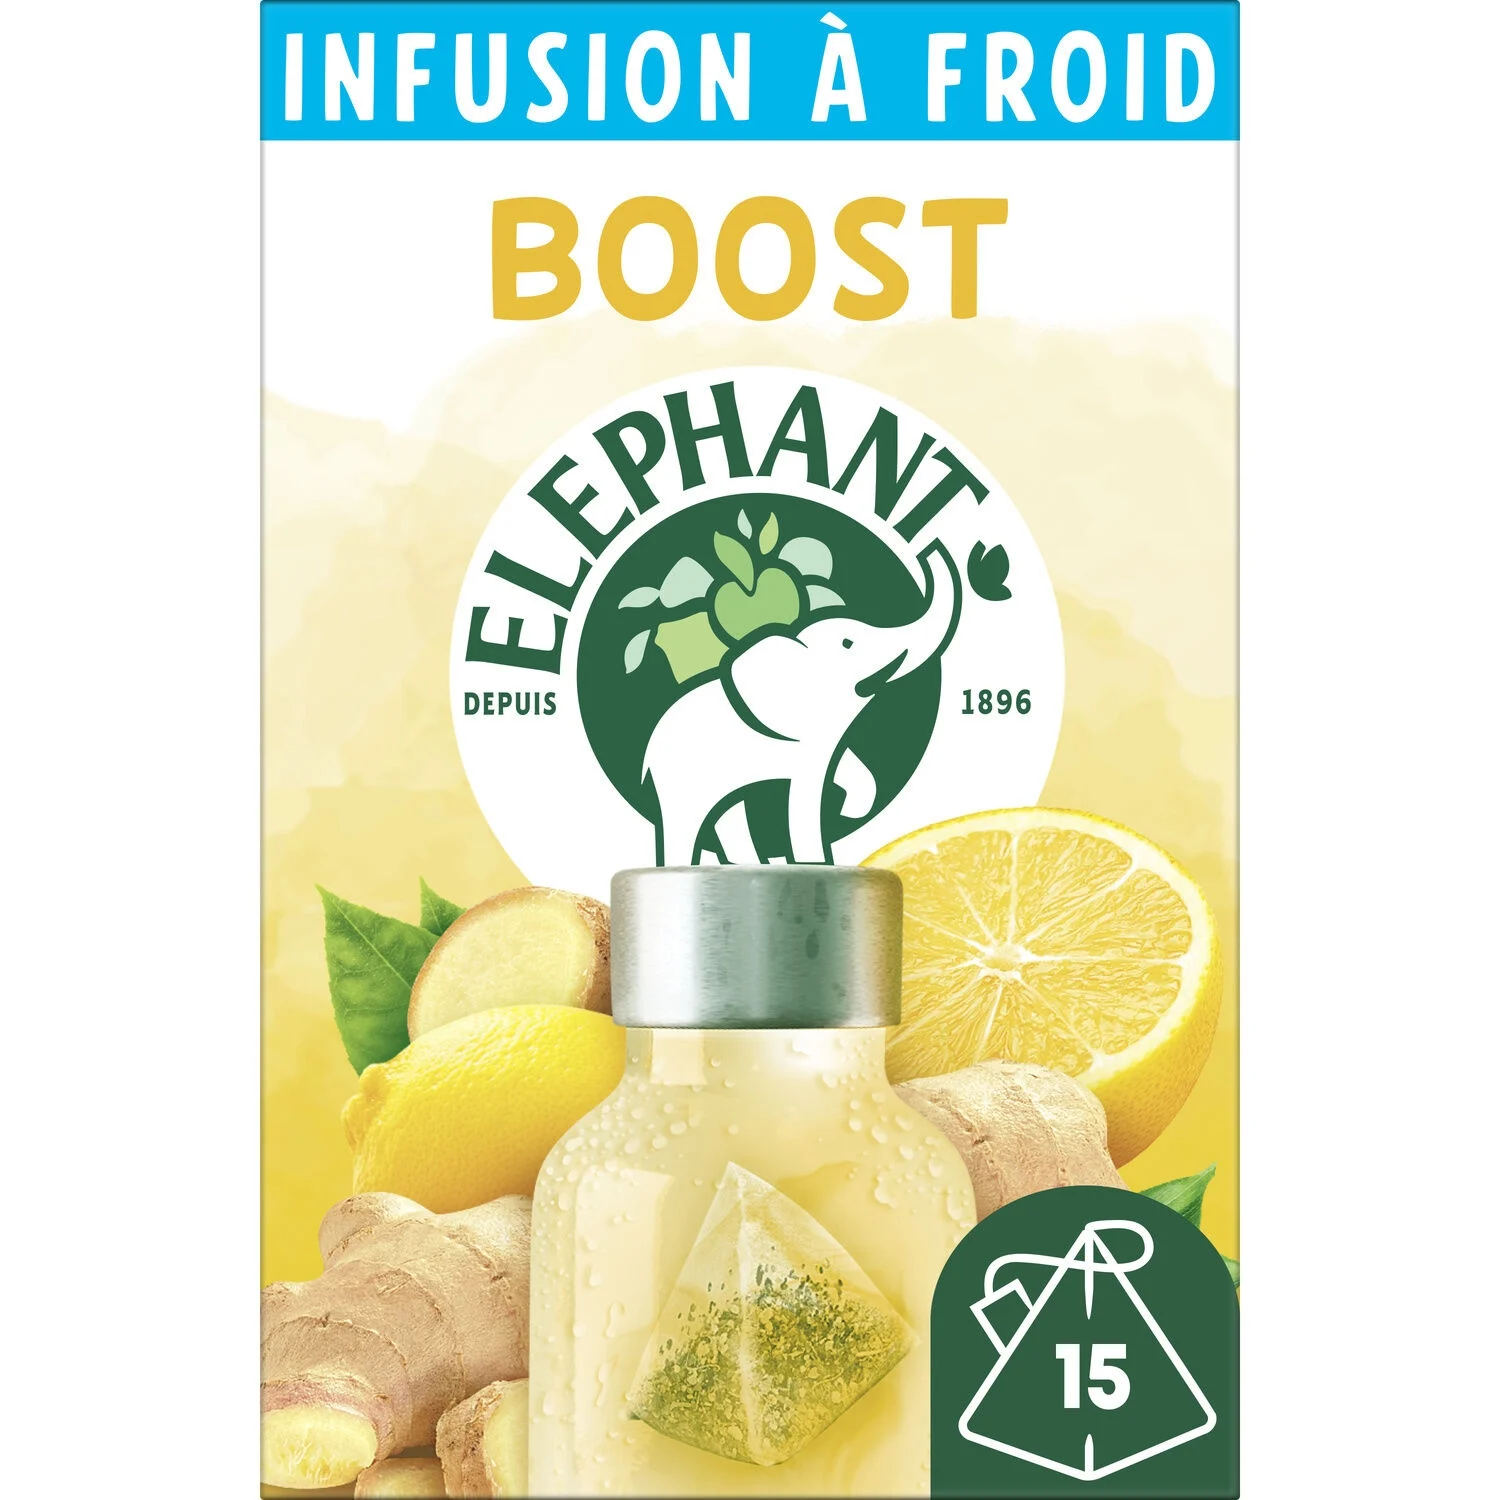 34g Eleph Infus Froid Boost